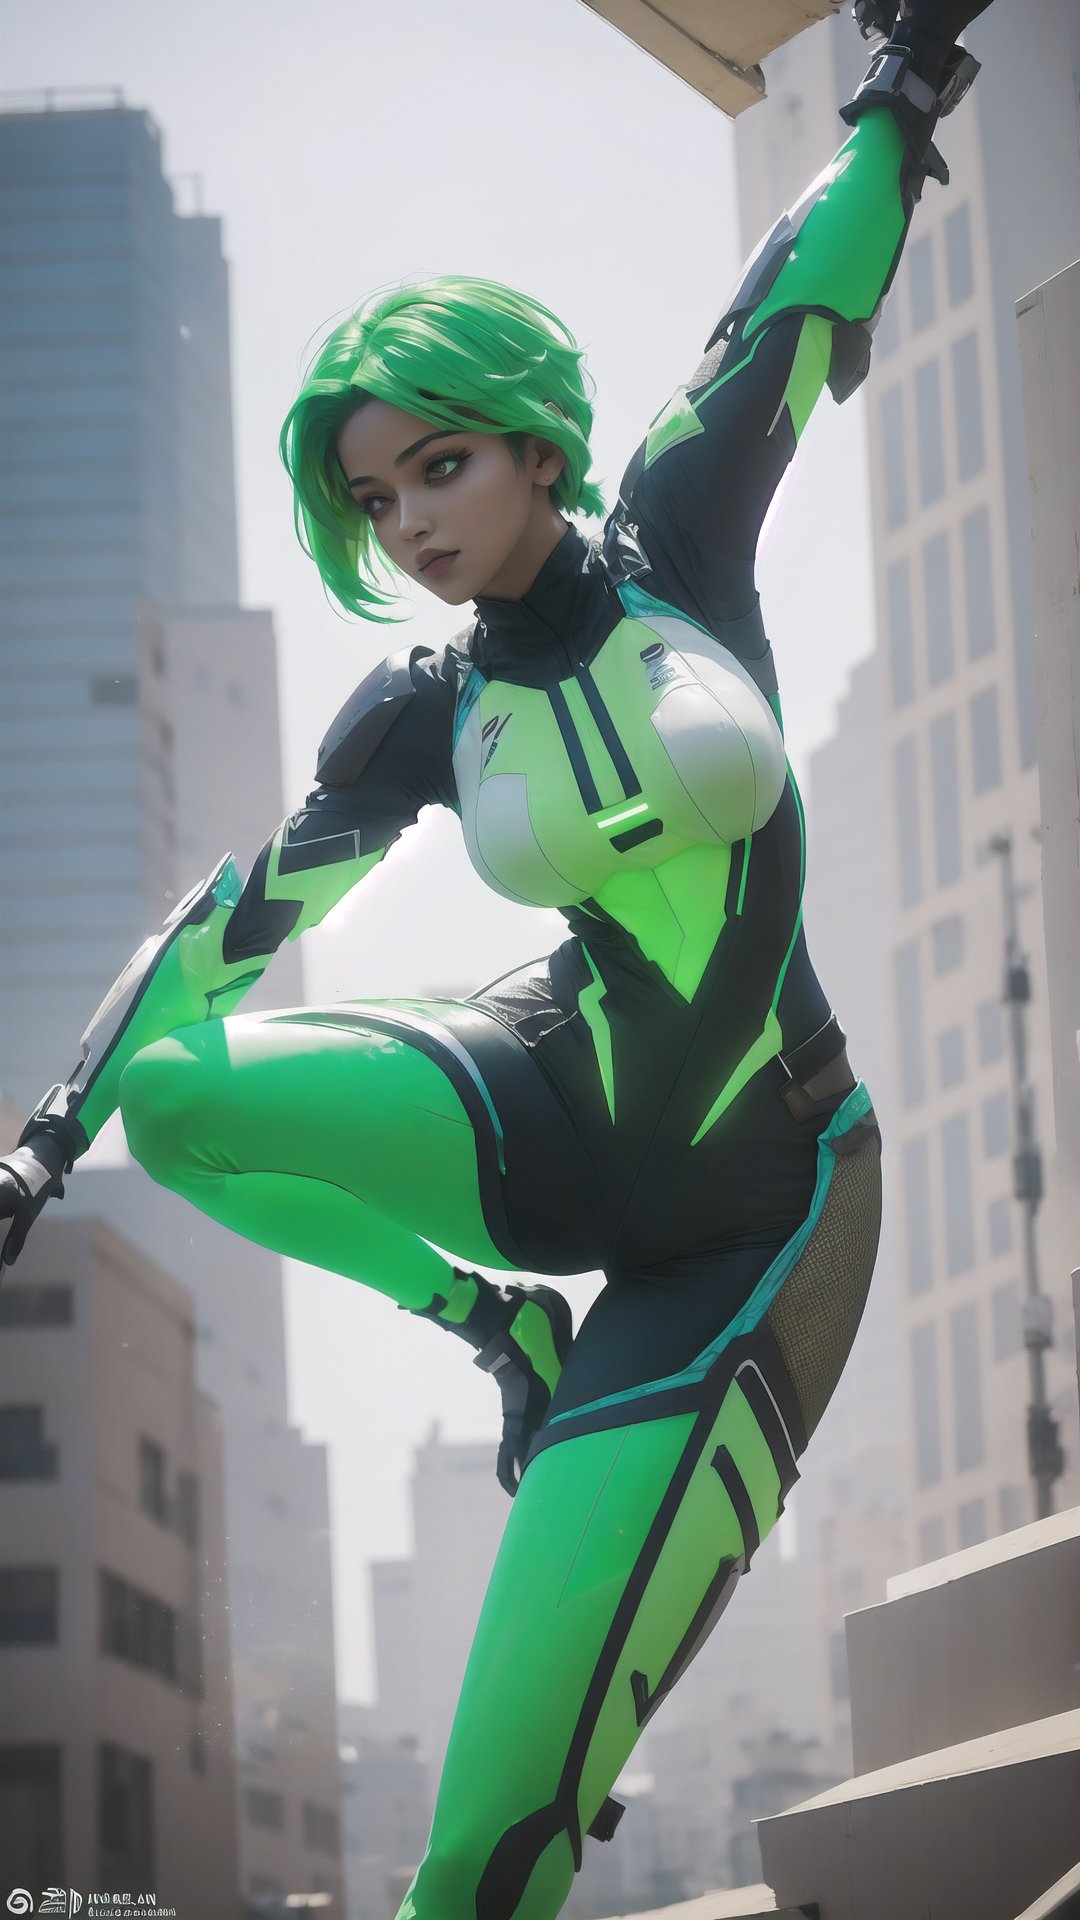 A young South Asian woman with bright green hair, wearing a high-tech, flexible bodysuit designed for agile movement. The suit is a mix of mesh and light armor, with glowing accents that highlight her acrobatic leaps across neon-lit rooftops, cyber_armor,photorealistic,cyber_armor